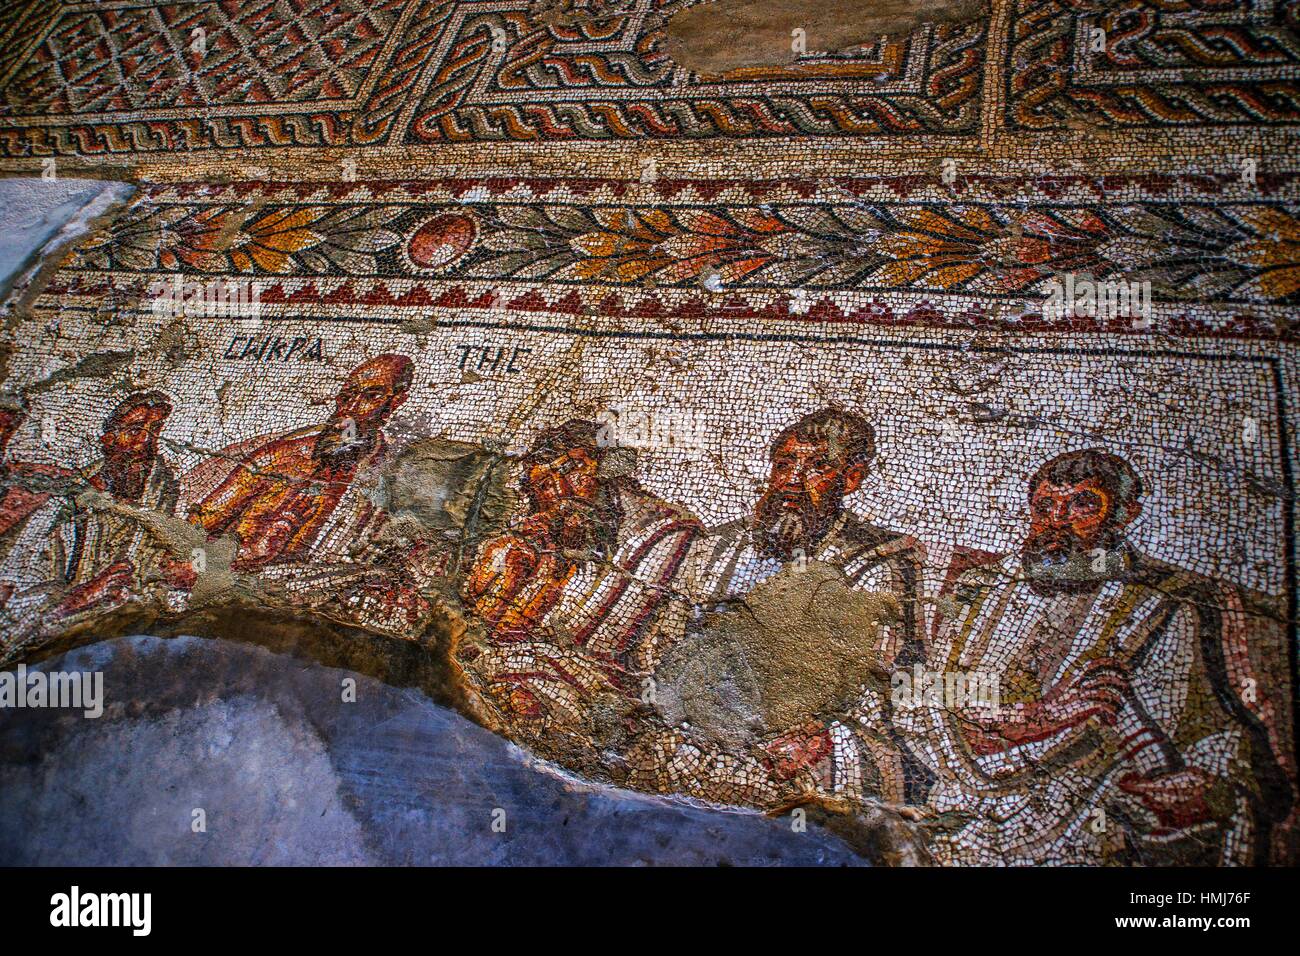 Mosaic of Socrates and the Sages (3rd century) at the Apamea Museum, Apamea, Syria Stock Photo